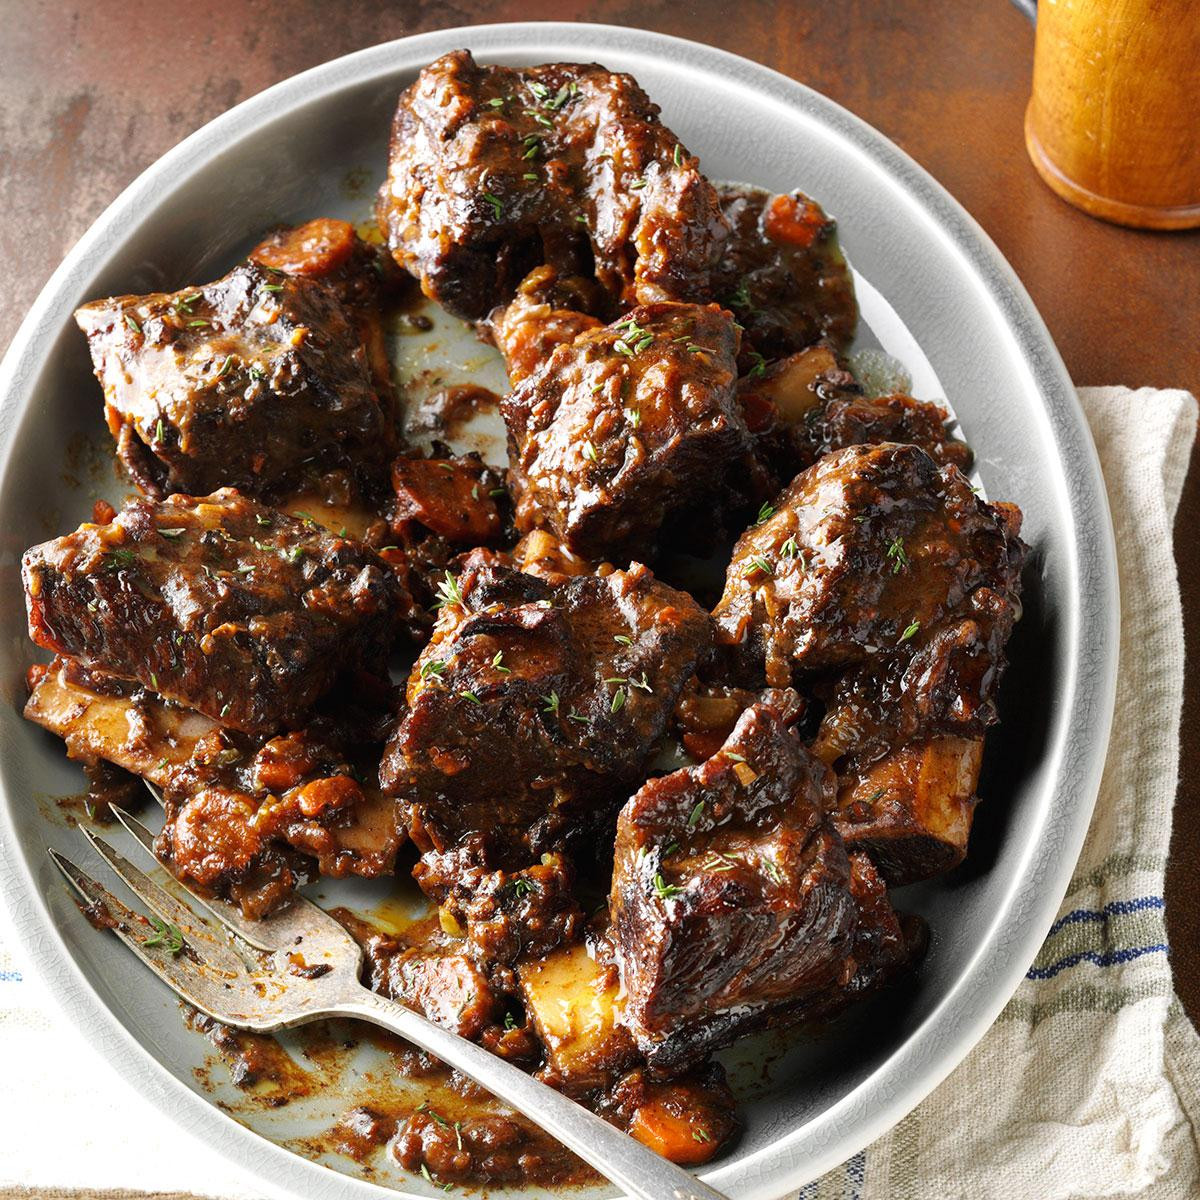 Recipes For Beef Short Ribs
 Beef Short Ribs in Burgundy Sauce Recipe